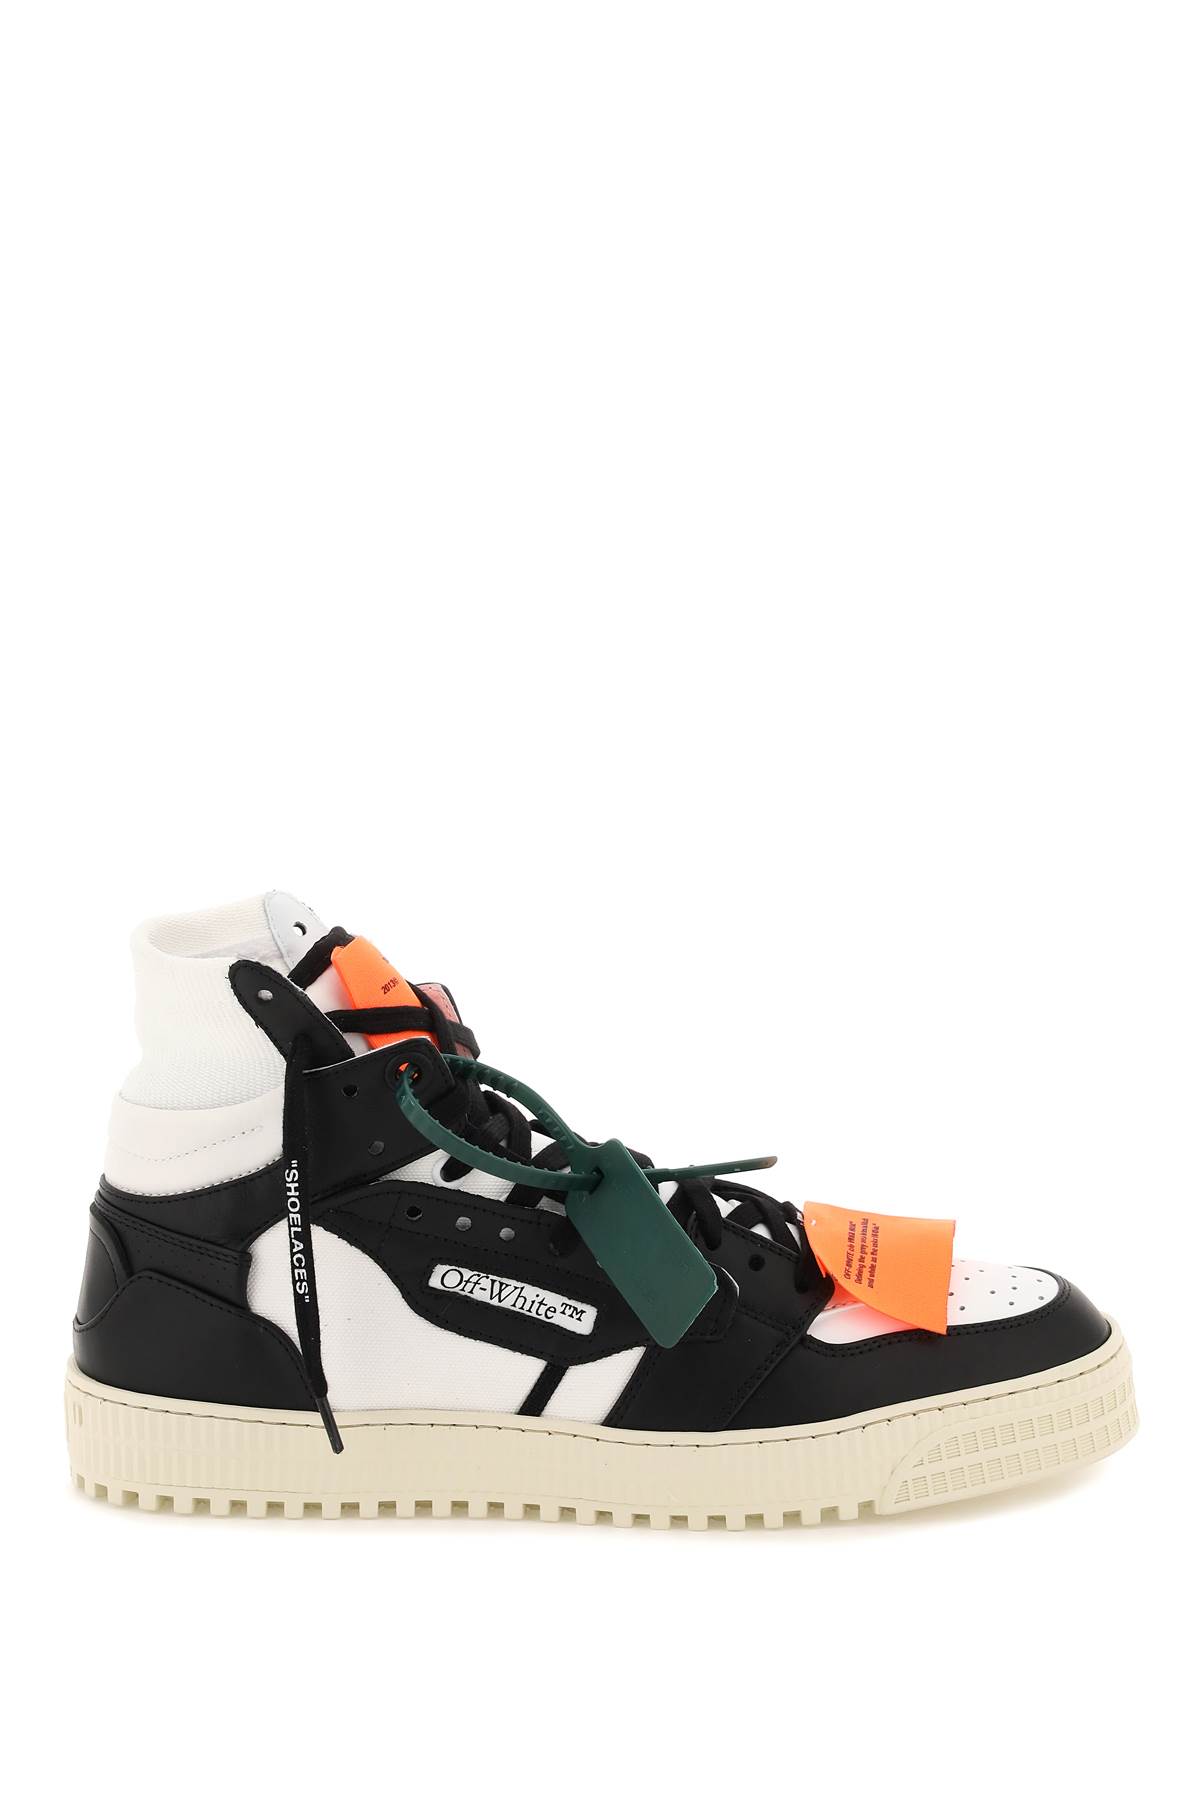 Off-White Off Court 3.0 Sneakers